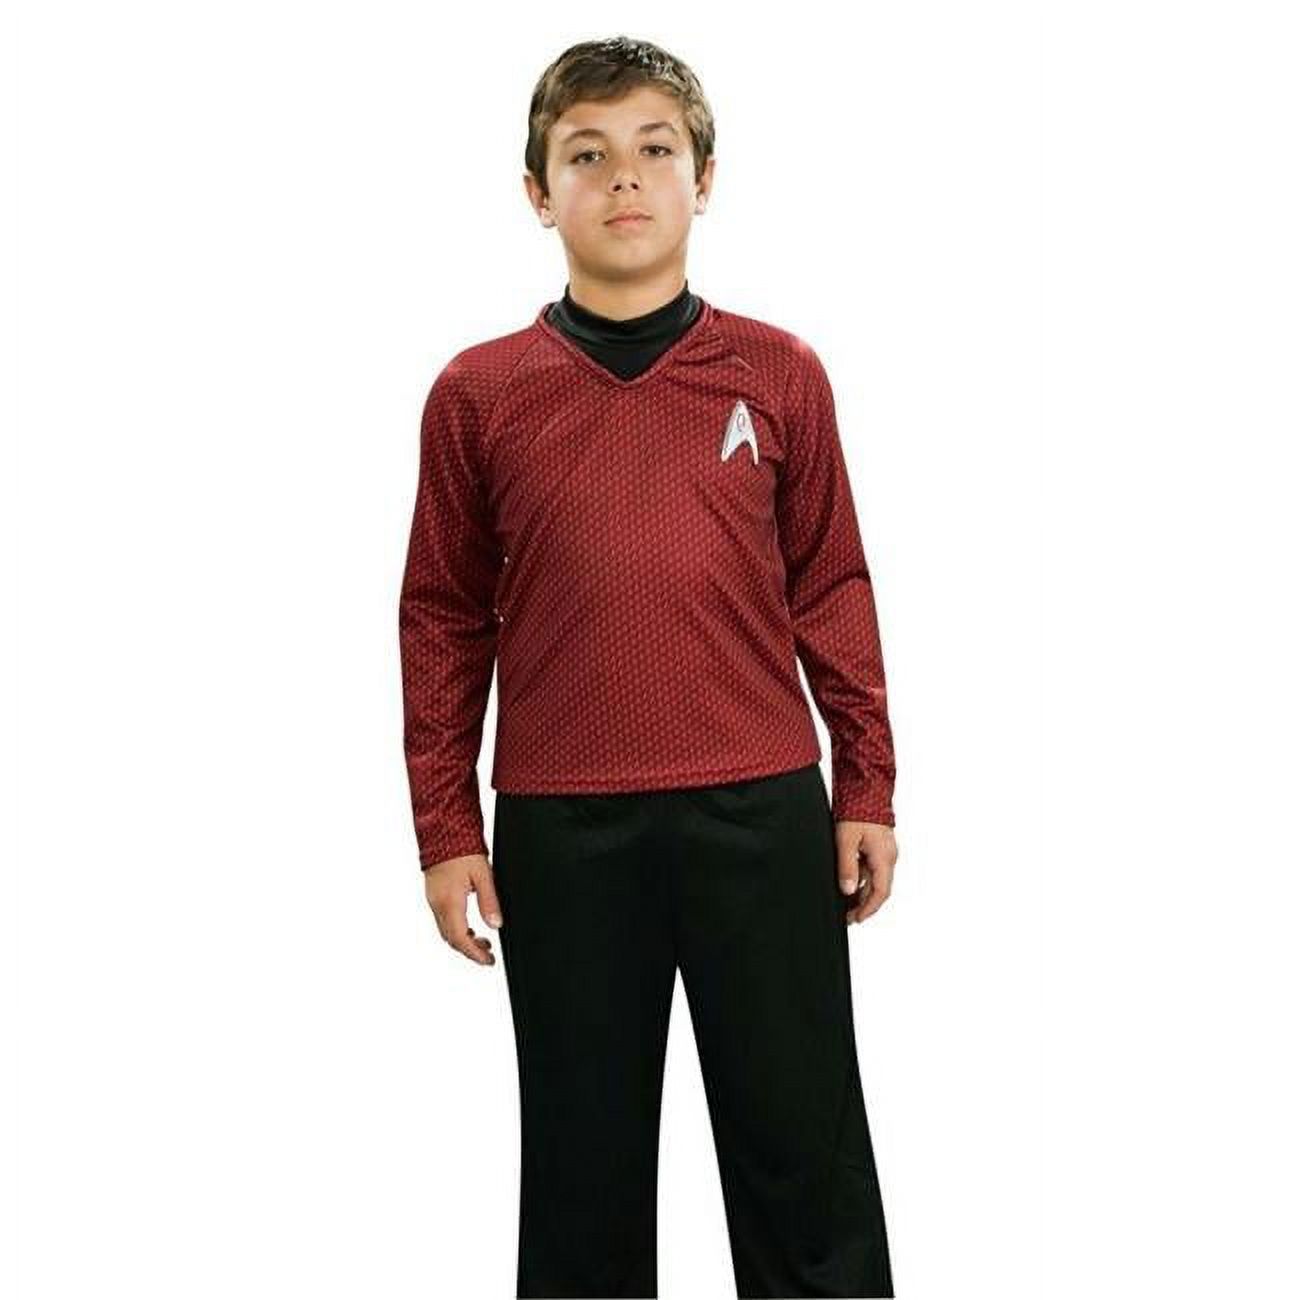 Star Trek Chld Dlx Red Cost Md - image 1 of 1